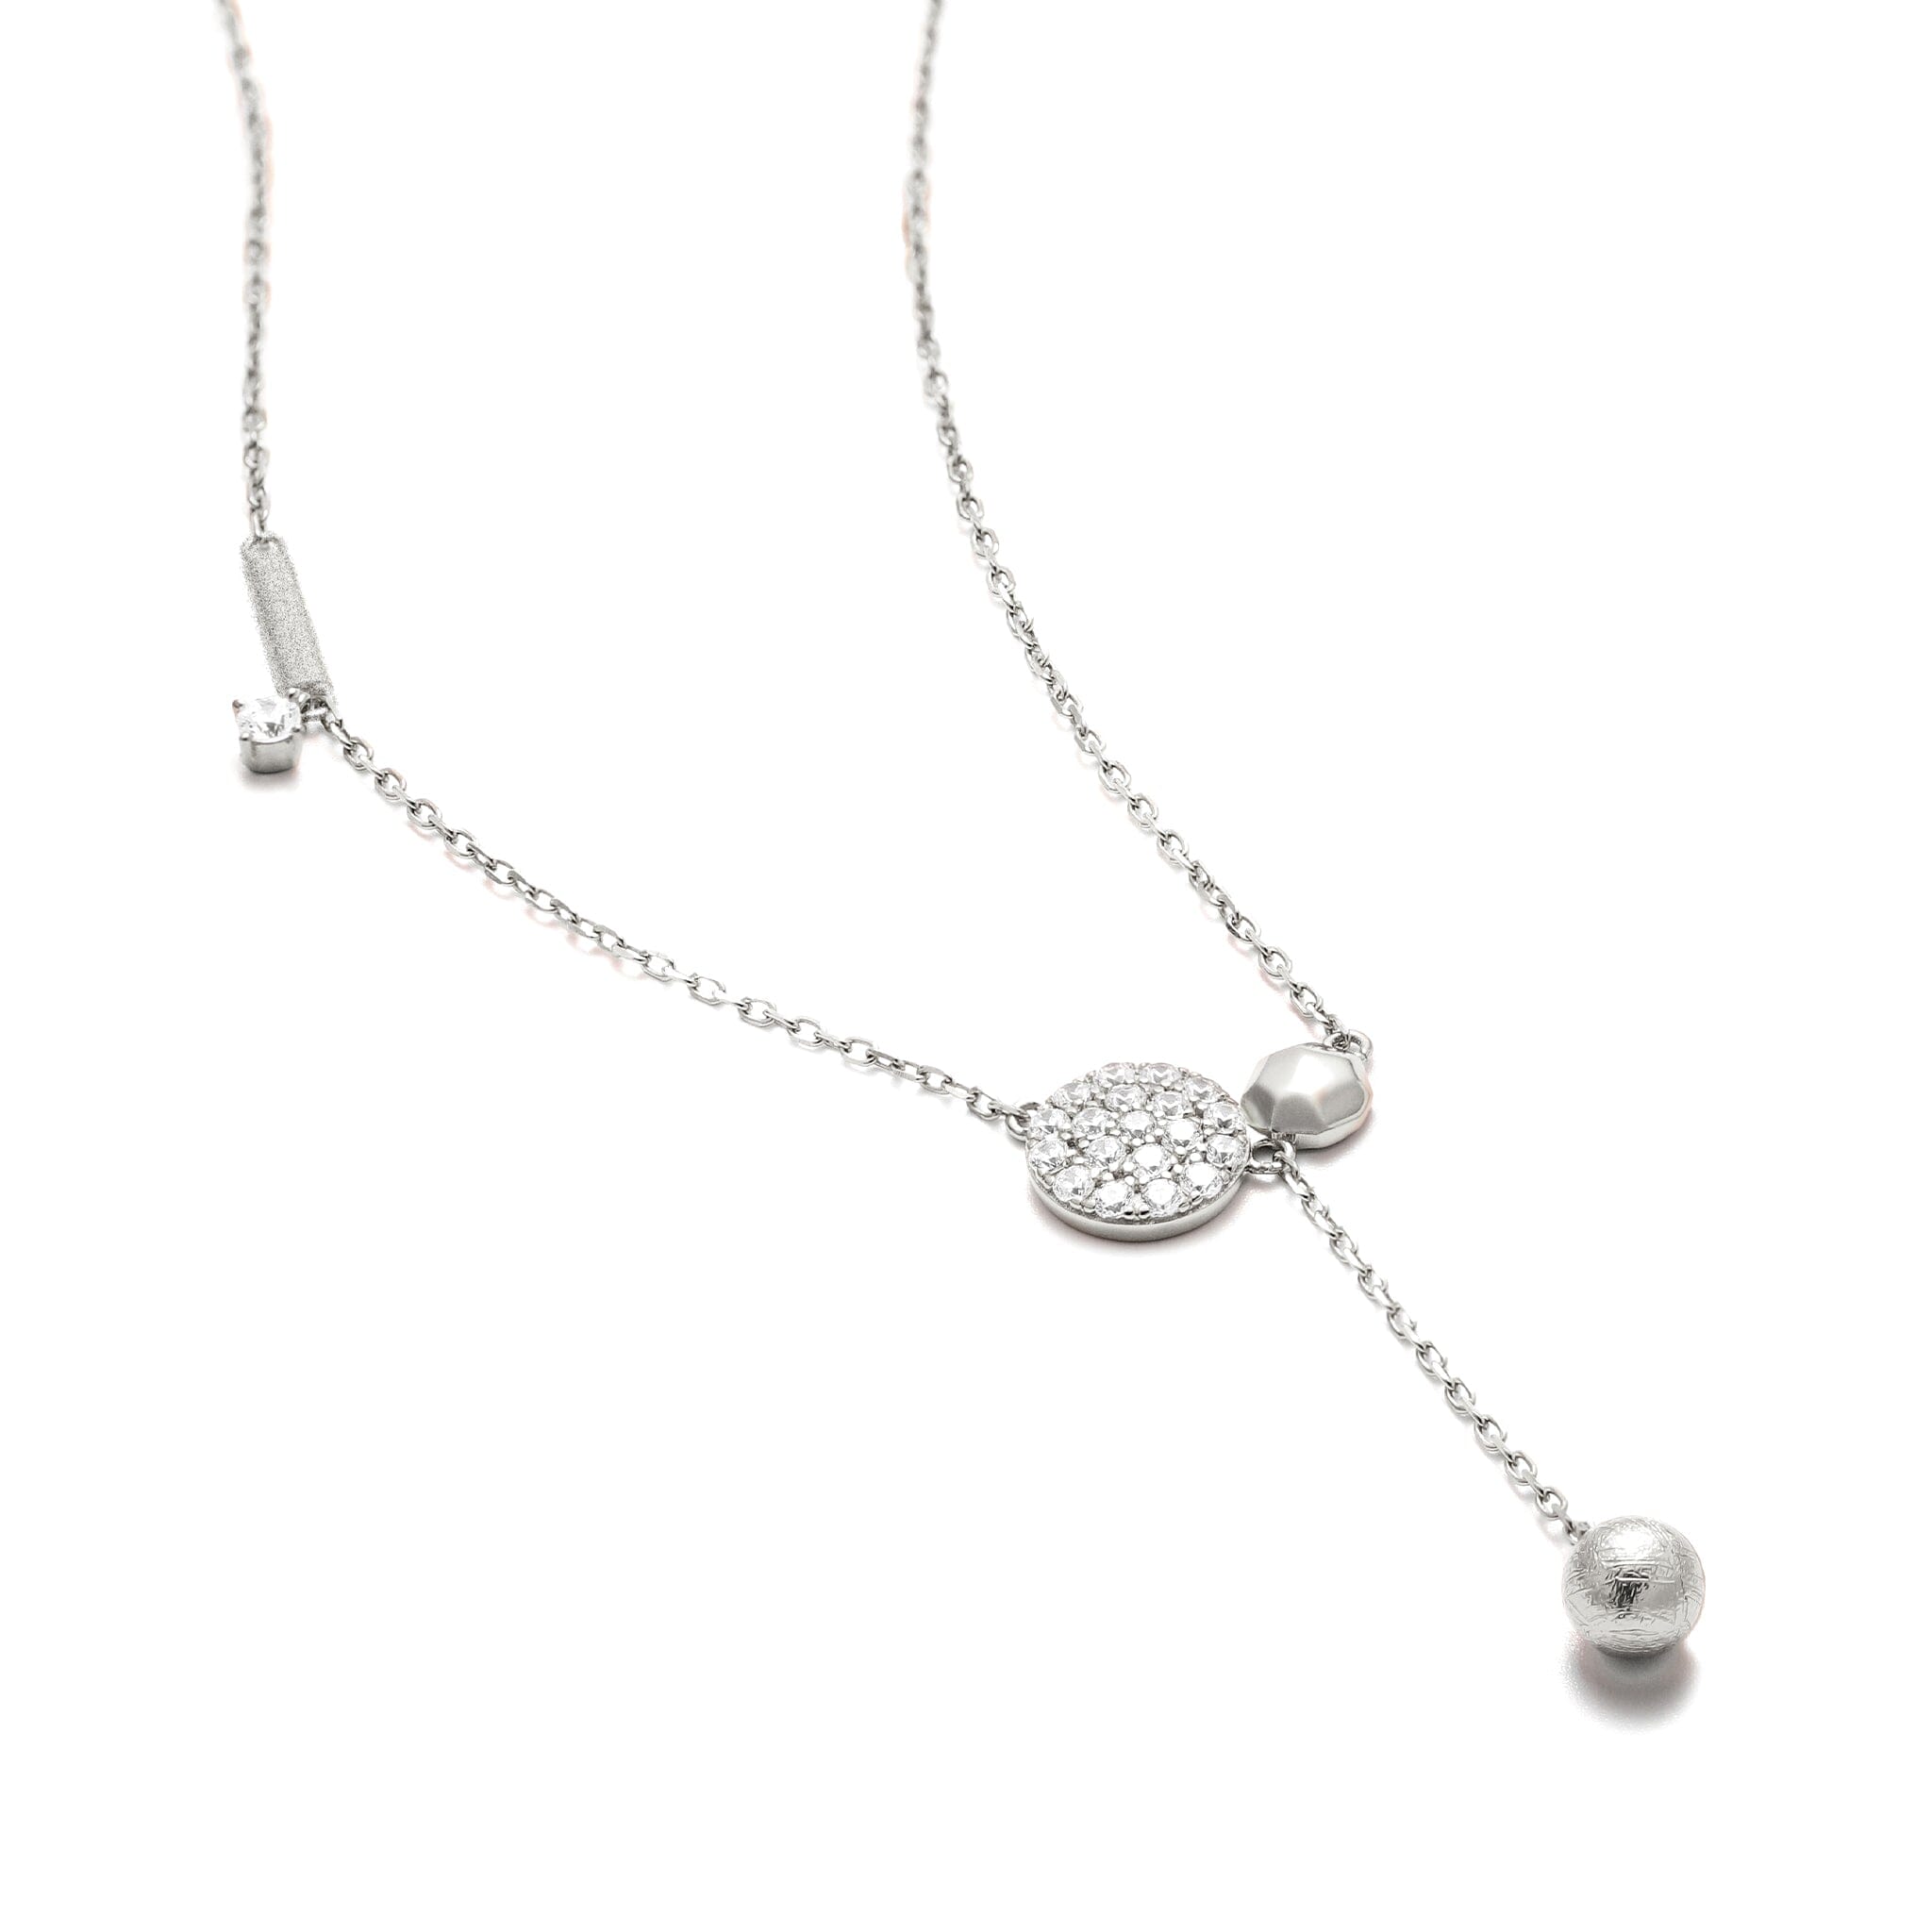 Women's Dark Sky Park Necklace with Meteorite Necklaces WAA FASHION GROUP Silver Adjustable 